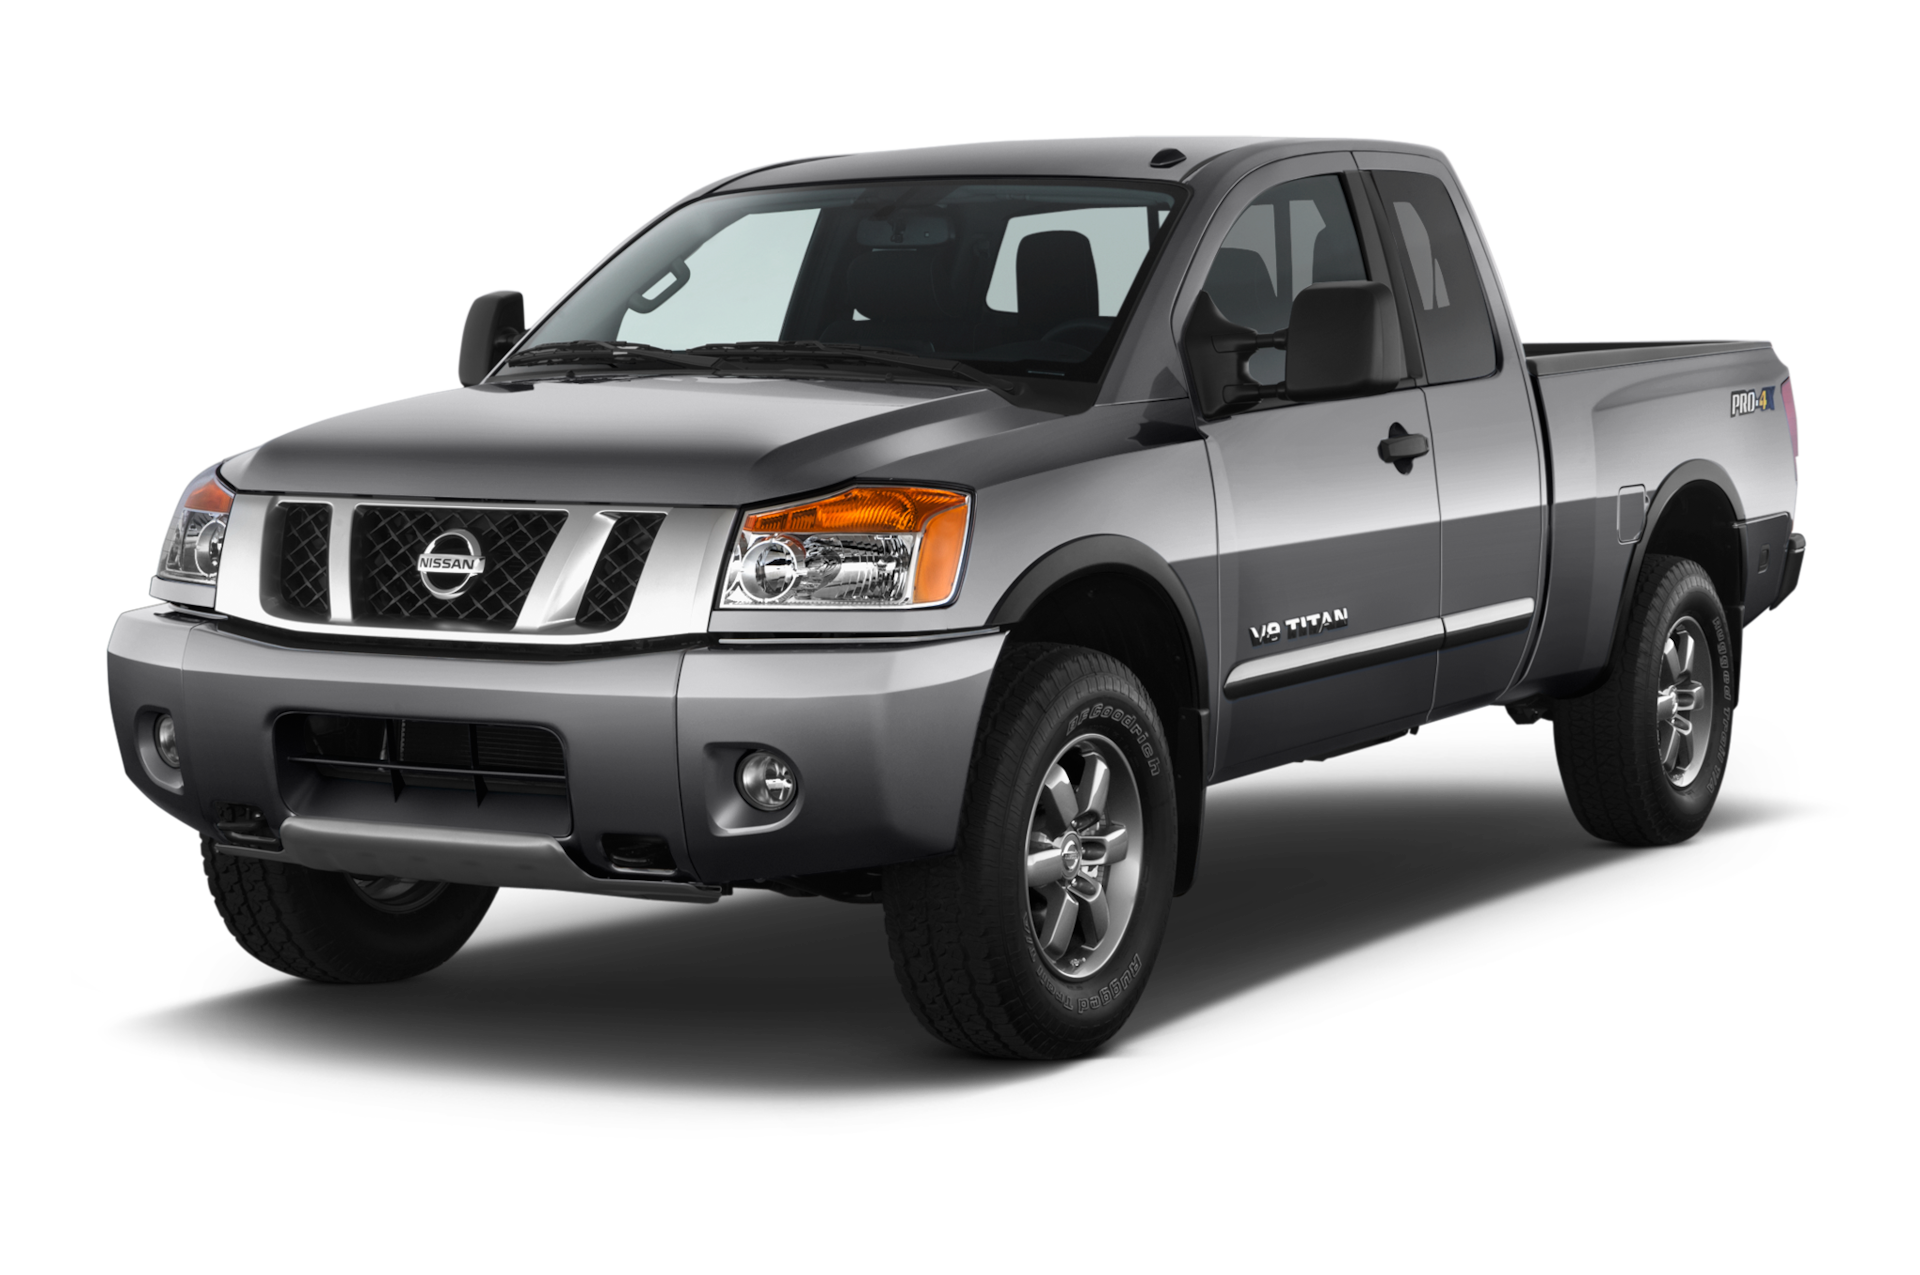 2014 Nissan Titan Prices, Reviews, and Photos - MotorTrend